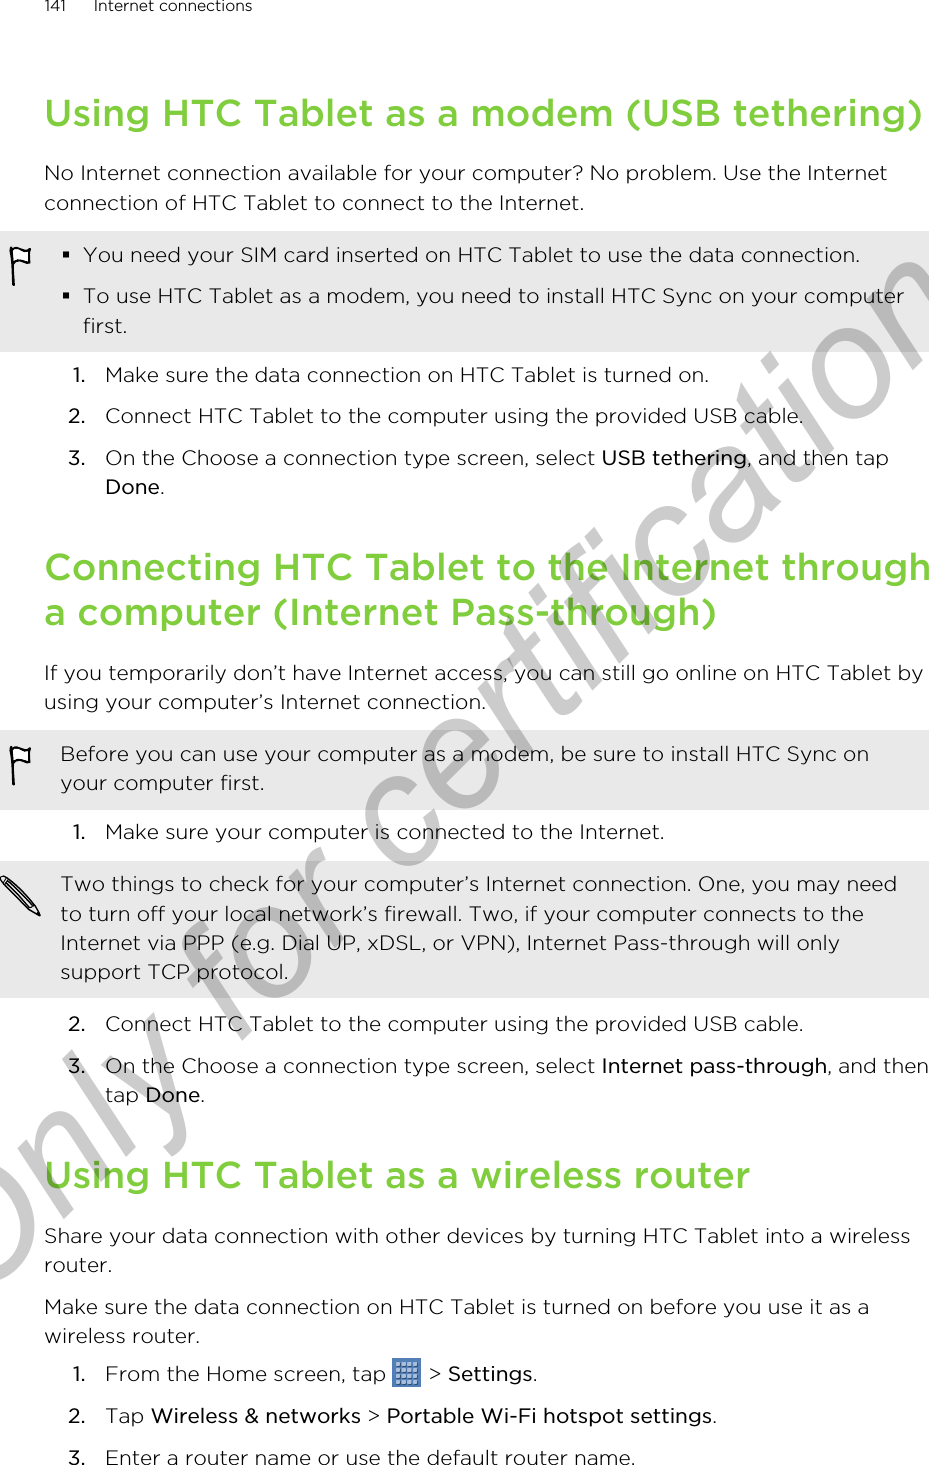 Using HTC Tablet as a modem (USB tethering)No Internet connection available for your computer? No problem. Use the Internetconnection of HTC Tablet to connect to the Internet.§You need your SIM card inserted on HTC Tablet to use the data connection.§To use HTC Tablet as a modem, you need to install HTC Sync on your computerfirst.1. Make sure the data connection on HTC Tablet is turned on.2. Connect HTC Tablet to the computer using the provided USB cable.3. On the Choose a connection type screen, select USB tethering, and then tapDone.Connecting HTC Tablet to the Internet througha computer (Internet Pass-through)If you temporarily don’t have Internet access, you can still go online on HTC Tablet byusing your computer’s Internet connection.Before you can use your computer as a modem, be sure to install HTC Sync onyour computer first.1. Make sure your computer is connected to the Internet. Two things to check for your computer’s Internet connection. One, you may needto turn off your local network’s firewall. Two, if your computer connects to theInternet via PPP (e.g. Dial UP, xDSL, or VPN), Internet Pass-through will onlysupport TCP protocol.2. Connect HTC Tablet to the computer using the provided USB cable.3. On the Choose a connection type screen, select Internet pass-through, and thentap Done.Using HTC Tablet as a wireless routerShare your data connection with other devices by turning HTC Tablet into a wirelessrouter.Make sure the data connection on HTC Tablet is turned on before you use it as awireless router.1. From the Home screen, tap   &gt; Settings.2. Tap Wireless &amp; networks &gt; Portable Wi-Fi hotspot settings.3. Enter a router name or use the default router name.141 Internet connectionsOnly for certification